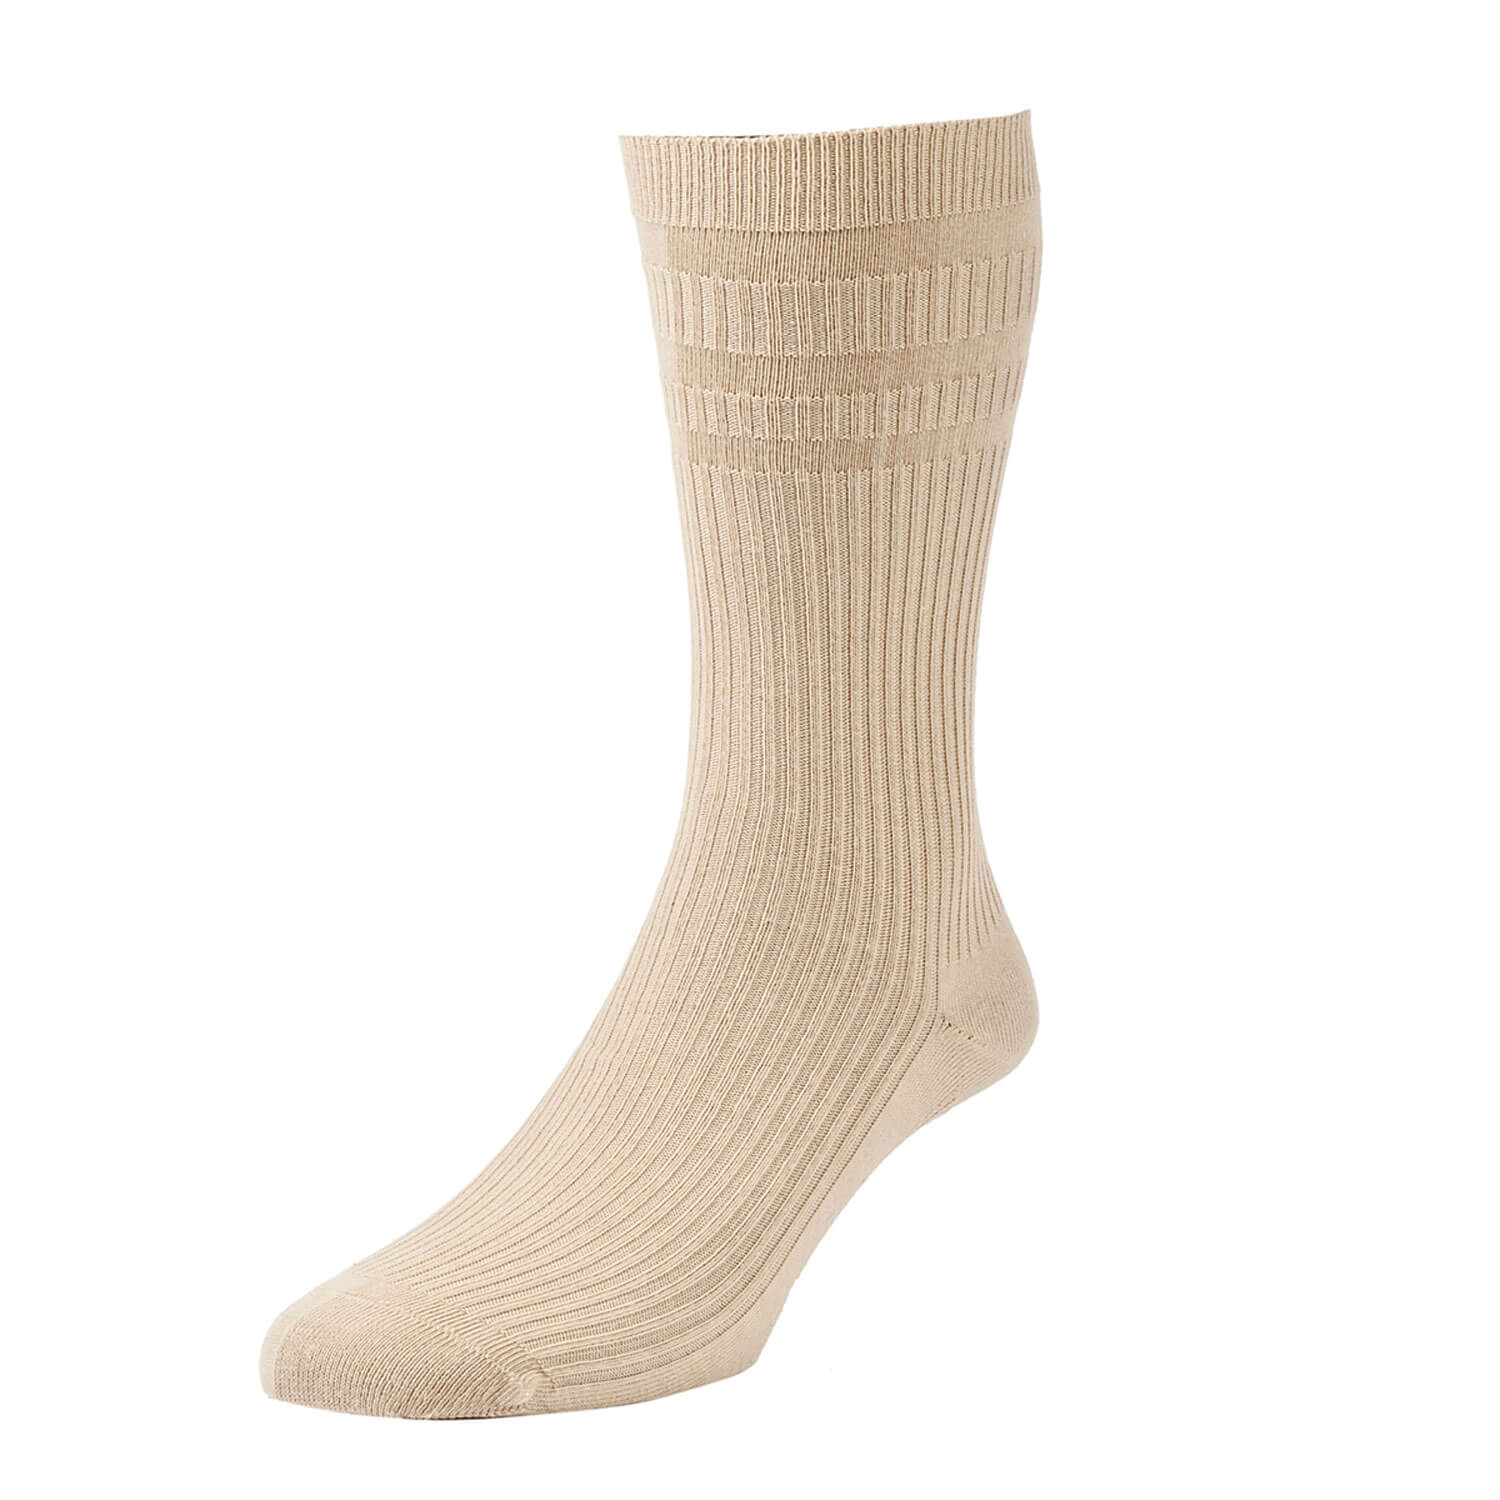 Hj Hall Softop Cotton Rich Diabetic Socks - Oatmeal 1 Shaws Department Stores